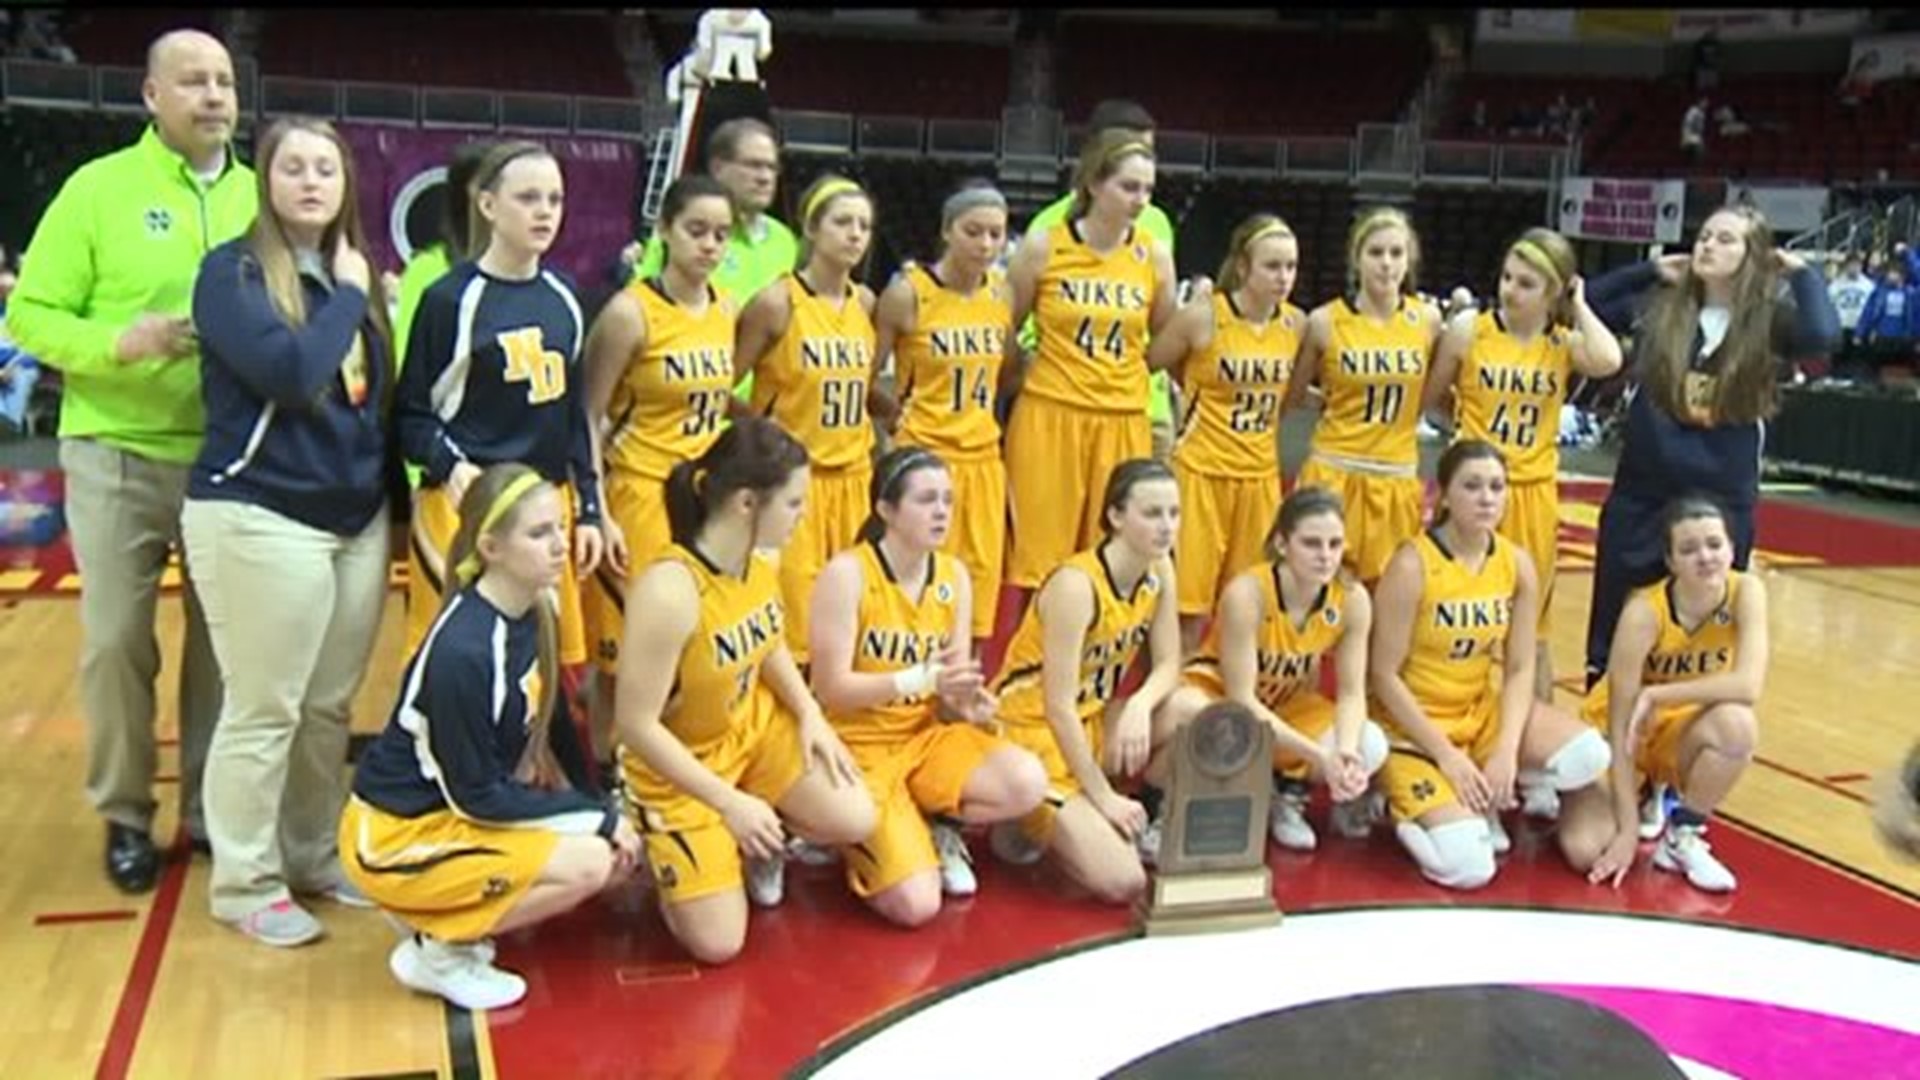 Notre Dame falls just short in semifinals